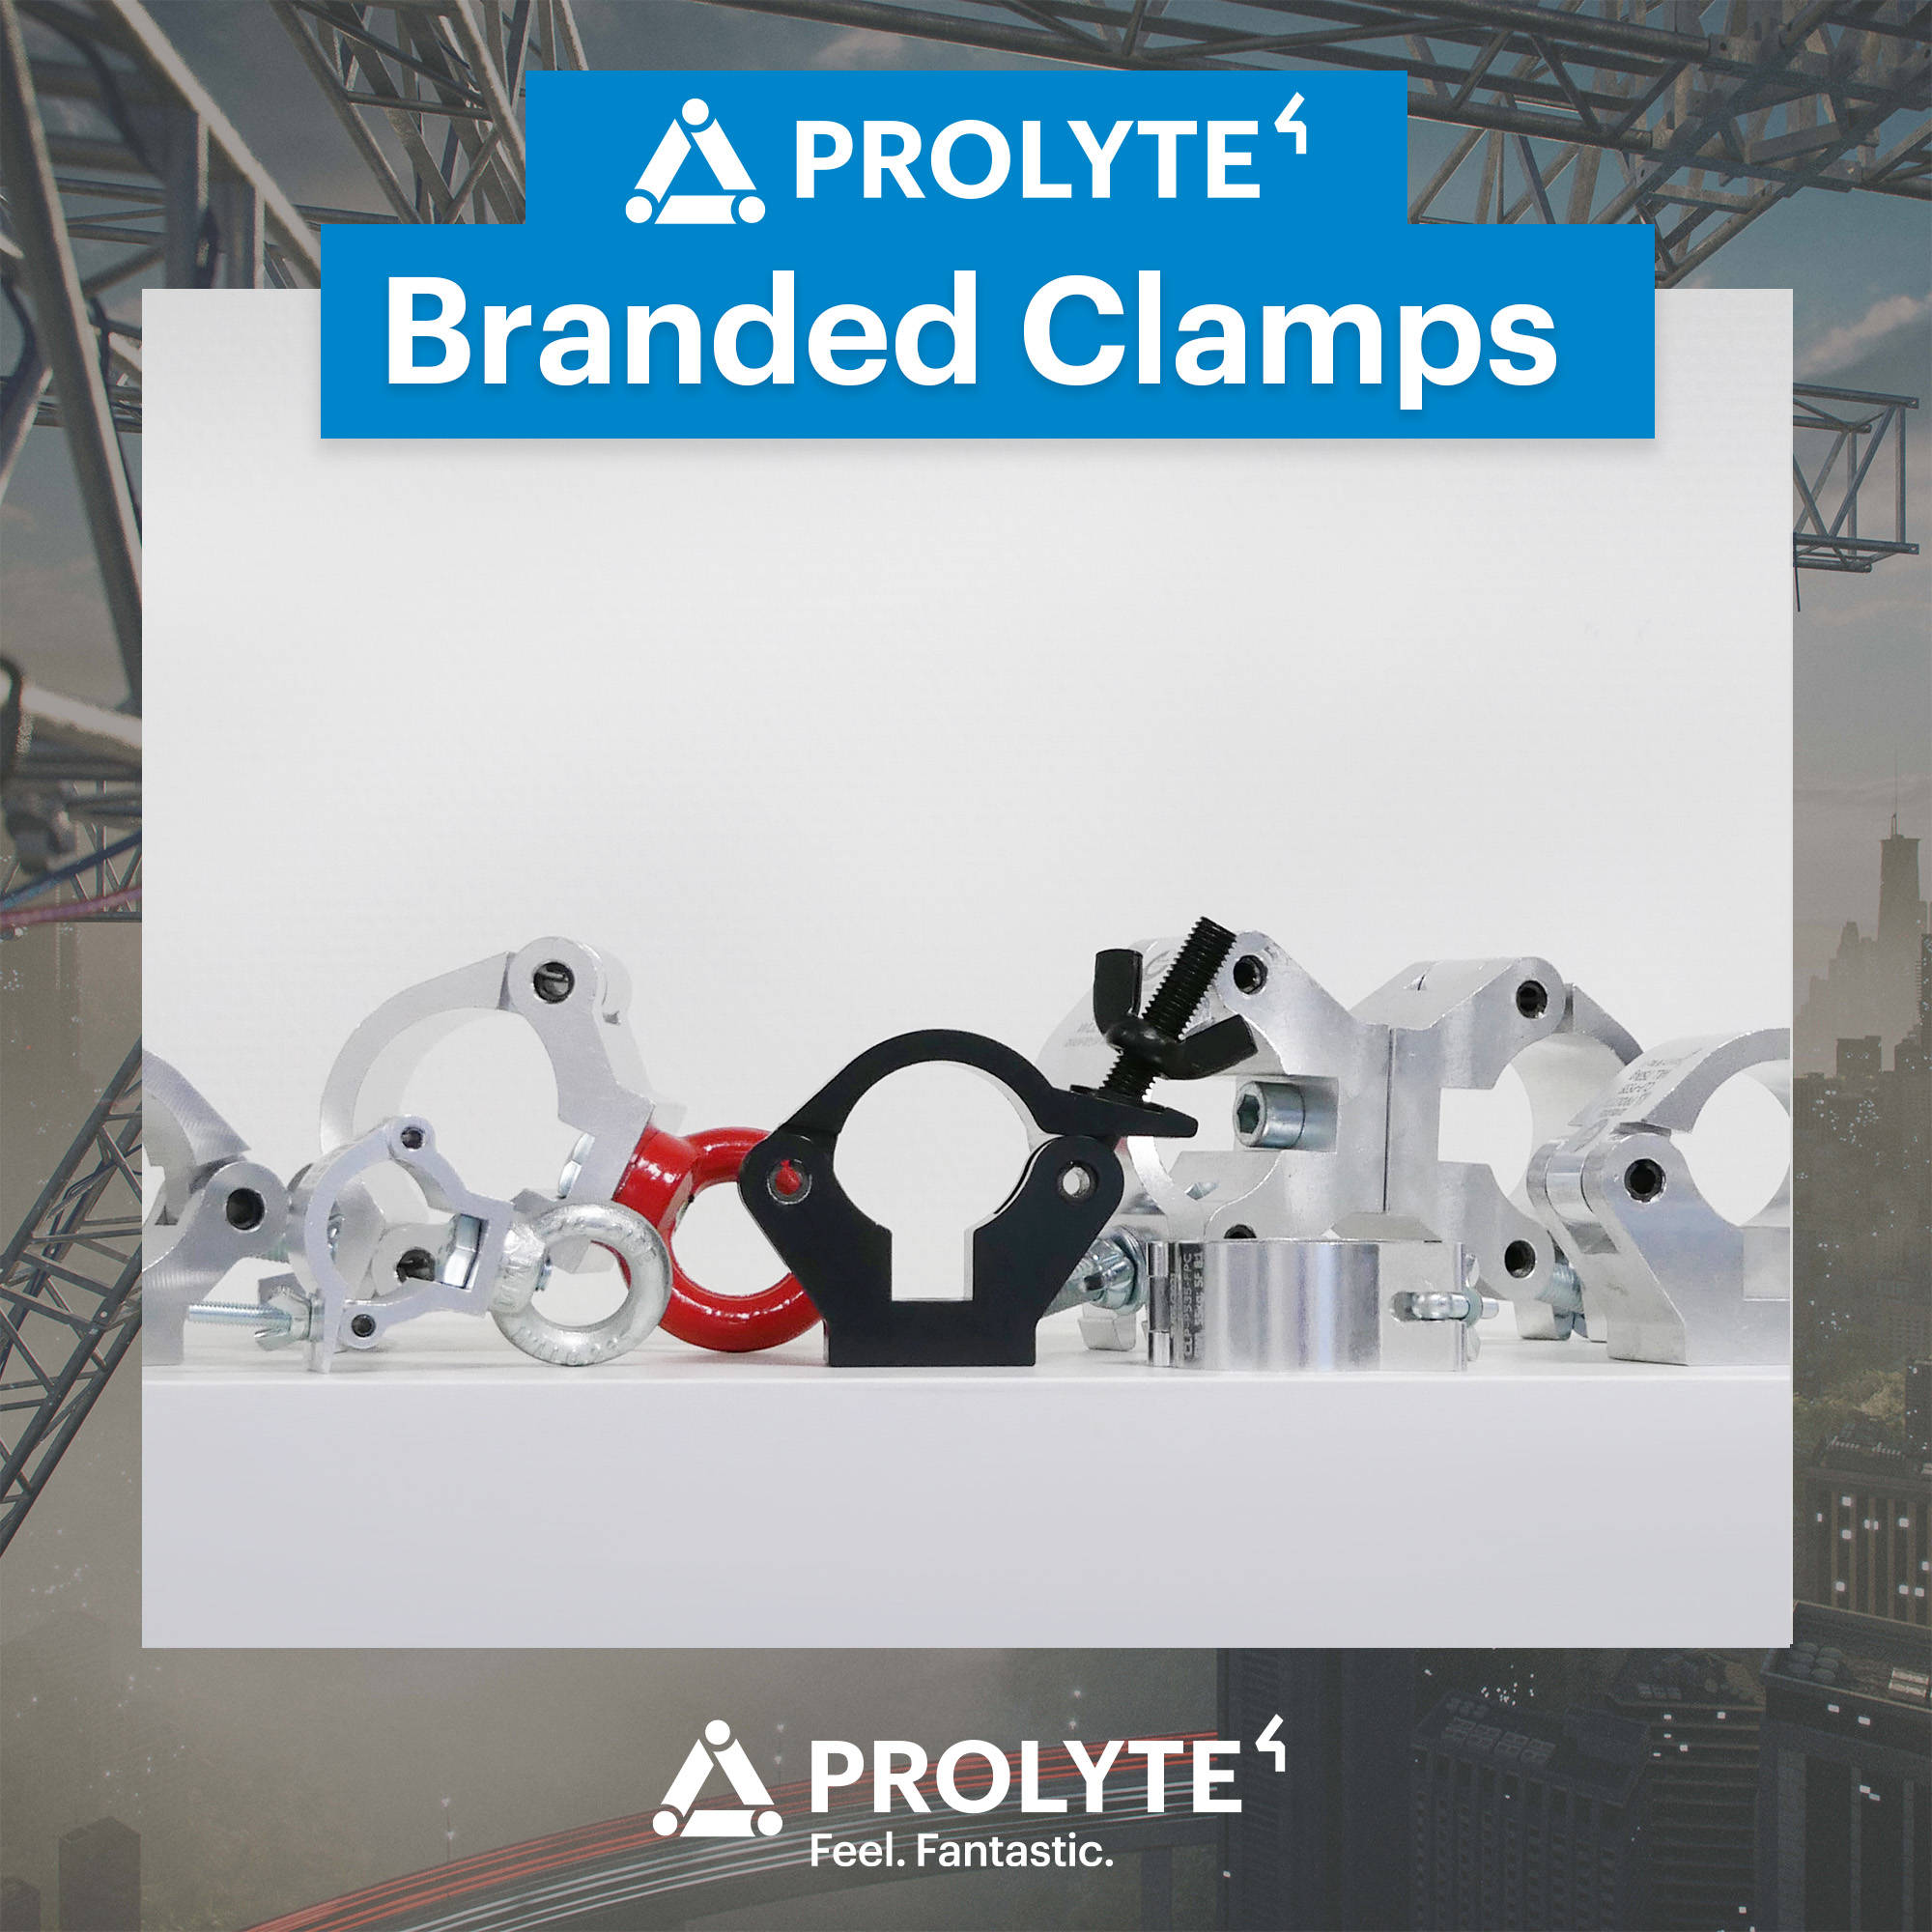 New product launch: Prolyte Branded Clamps